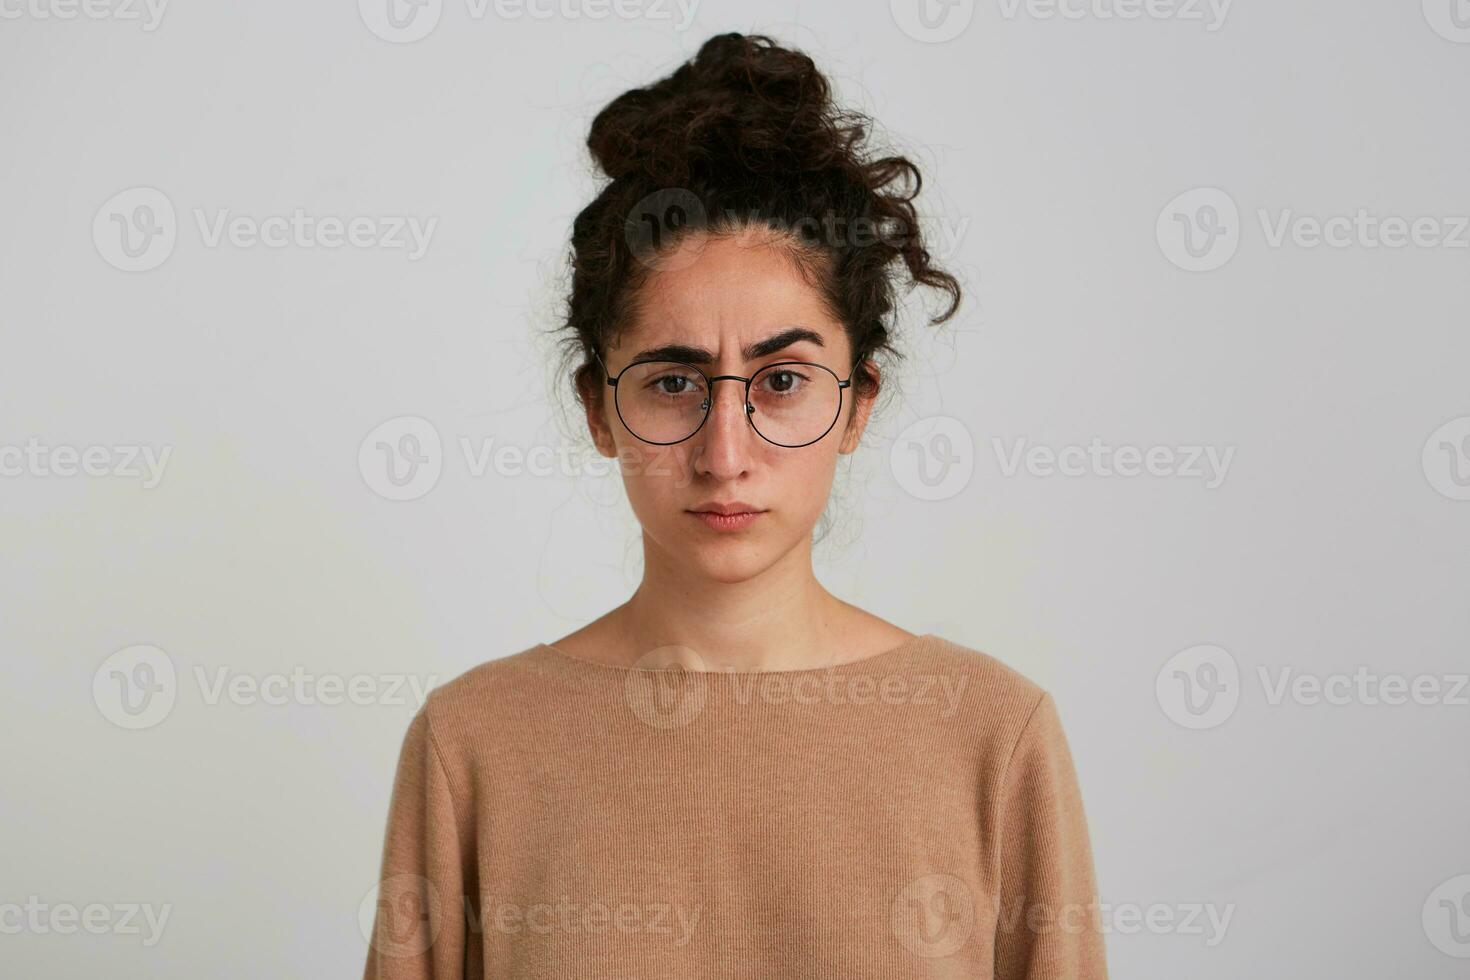 Frowning lady, serious woman with dark curly hair bun. Wearing beige jumper and glasses. Emotion concept. Lifts eyebrow. Watching unsure at the camera isolated over white background photo